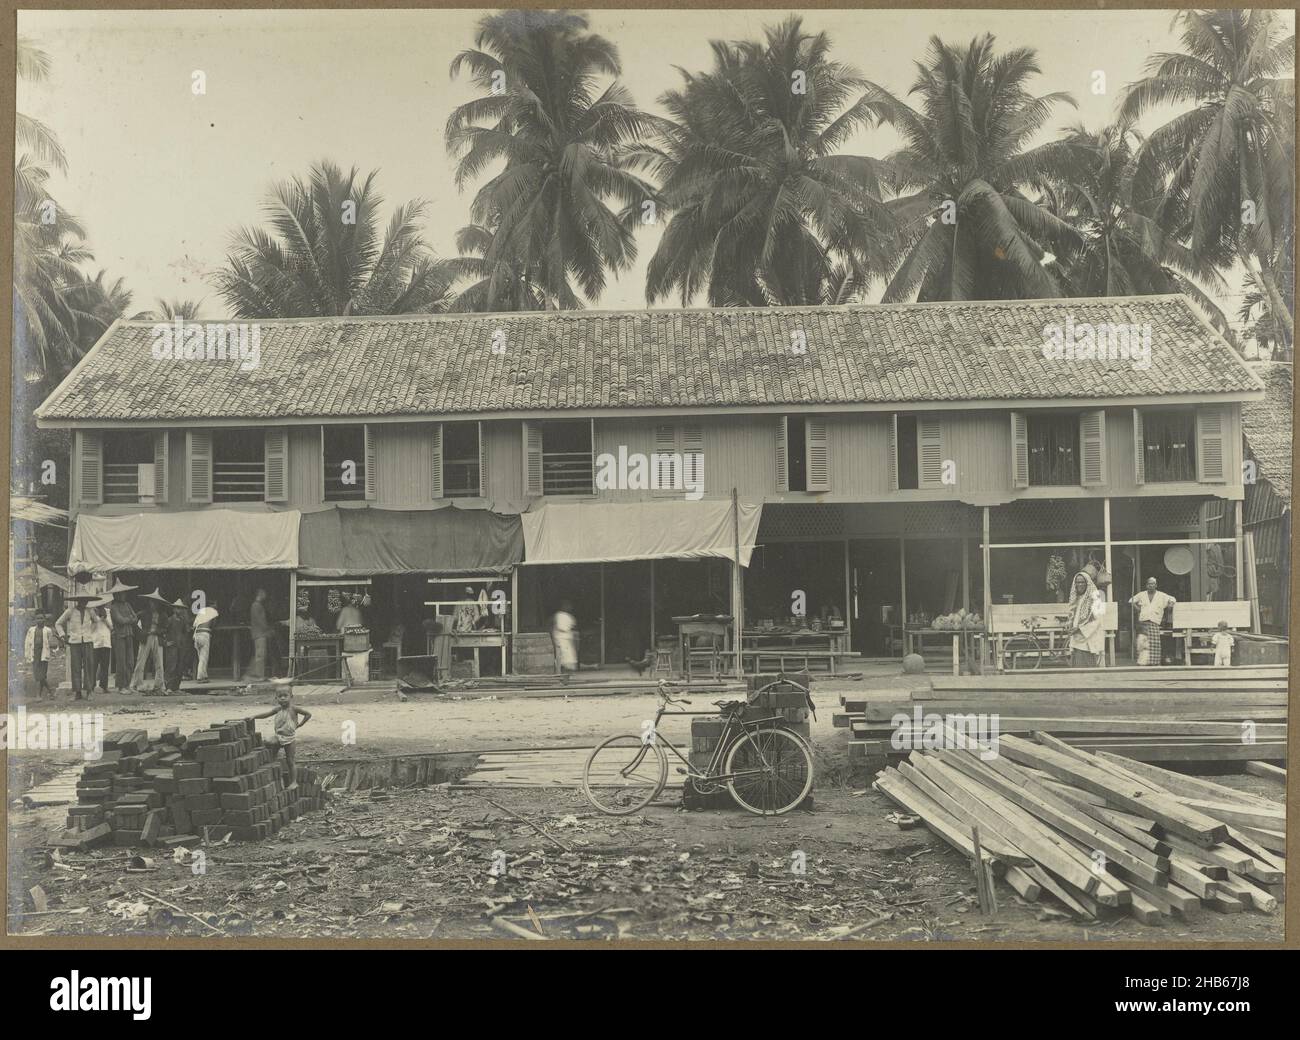 Commissioning of a store building, The commissioning of the finished block with several stores, probably in Medan. In the foreground a bicycle and piles of remaining building materials. Photo in the photo album of the Dutch architectural and contracting firm Bennink and Riphagen in Medan in the years ca. 1914-1919., anonymous, Medan, 1914 - 1919, photographic support, gelatin silver print, height 141 mm × width 197 mm Stock Photo